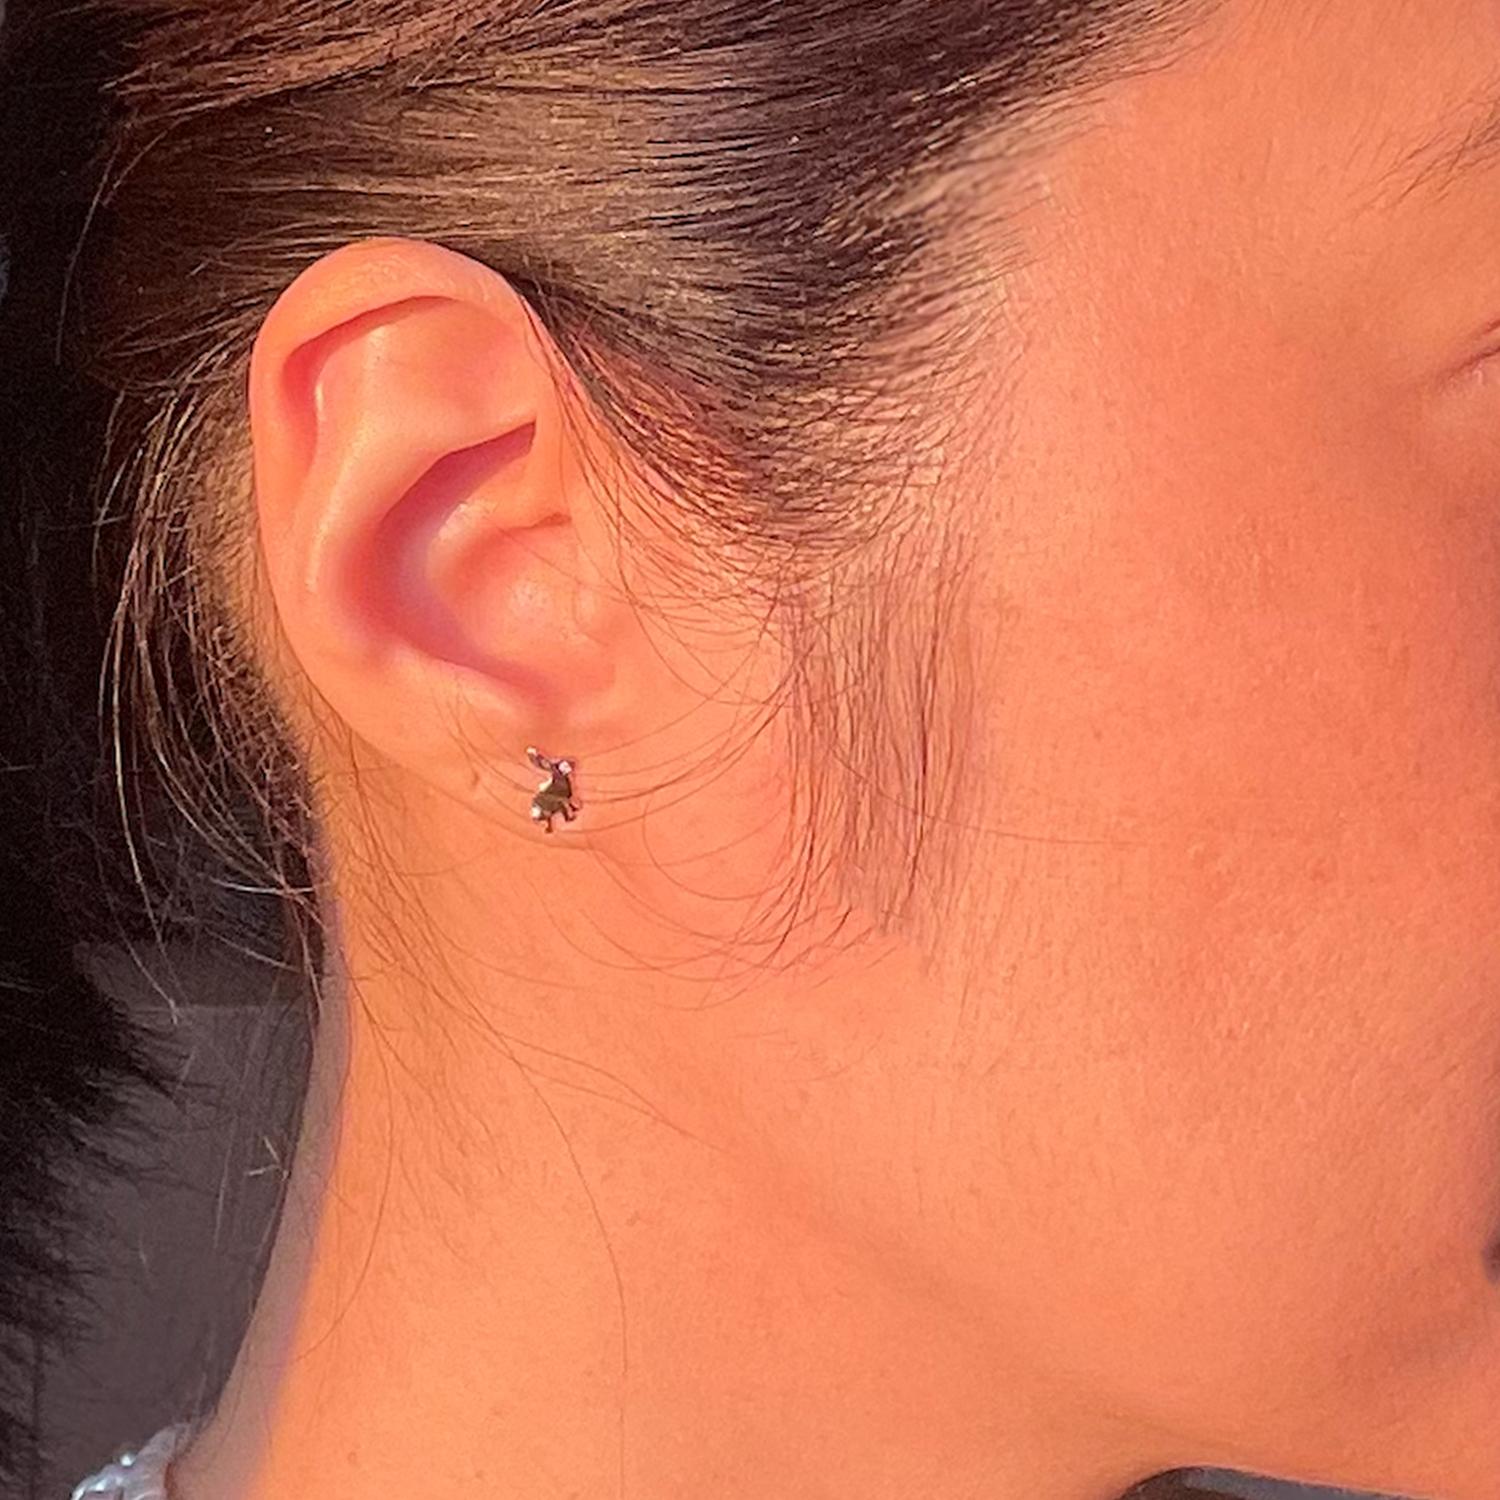 The mini version of the Trickster Bunny stud earring with diamond eyes. These are perfect to wear with your favorite go-to hoop, drop earrings or ear cuff.

Small enough to wear with multiple piercings as well as on their own. The eyes are set with